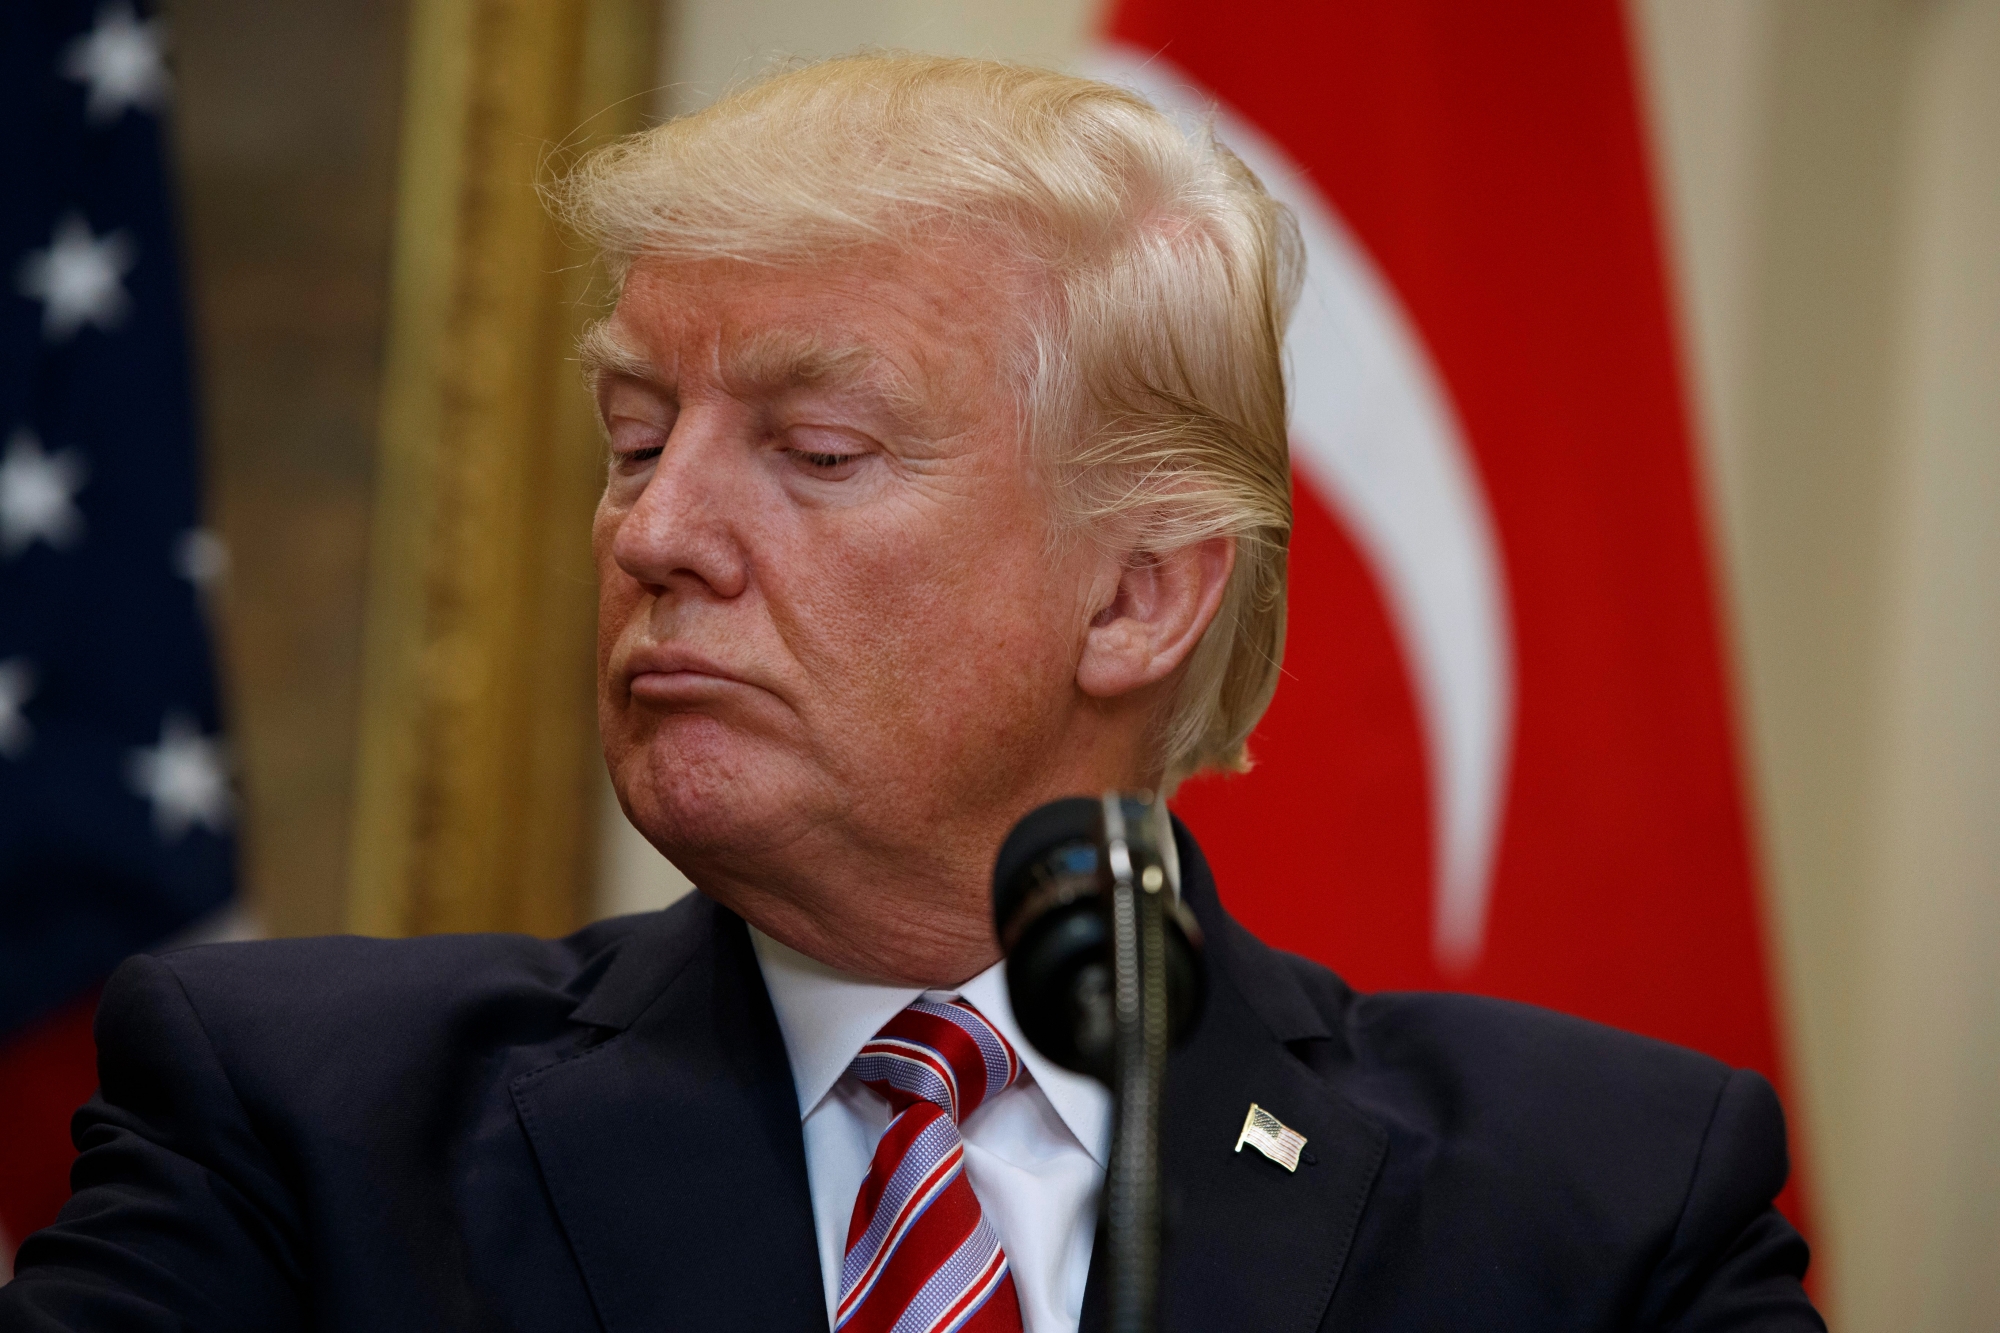 President Donald Trump listens as Turkish President Recep Tayyip Erdogan speaks in the Roosevelt Room of the White House in Washington, Tuesday, May 16, 2017. (AP Photo/Evan Vucci) Trump US Turkey